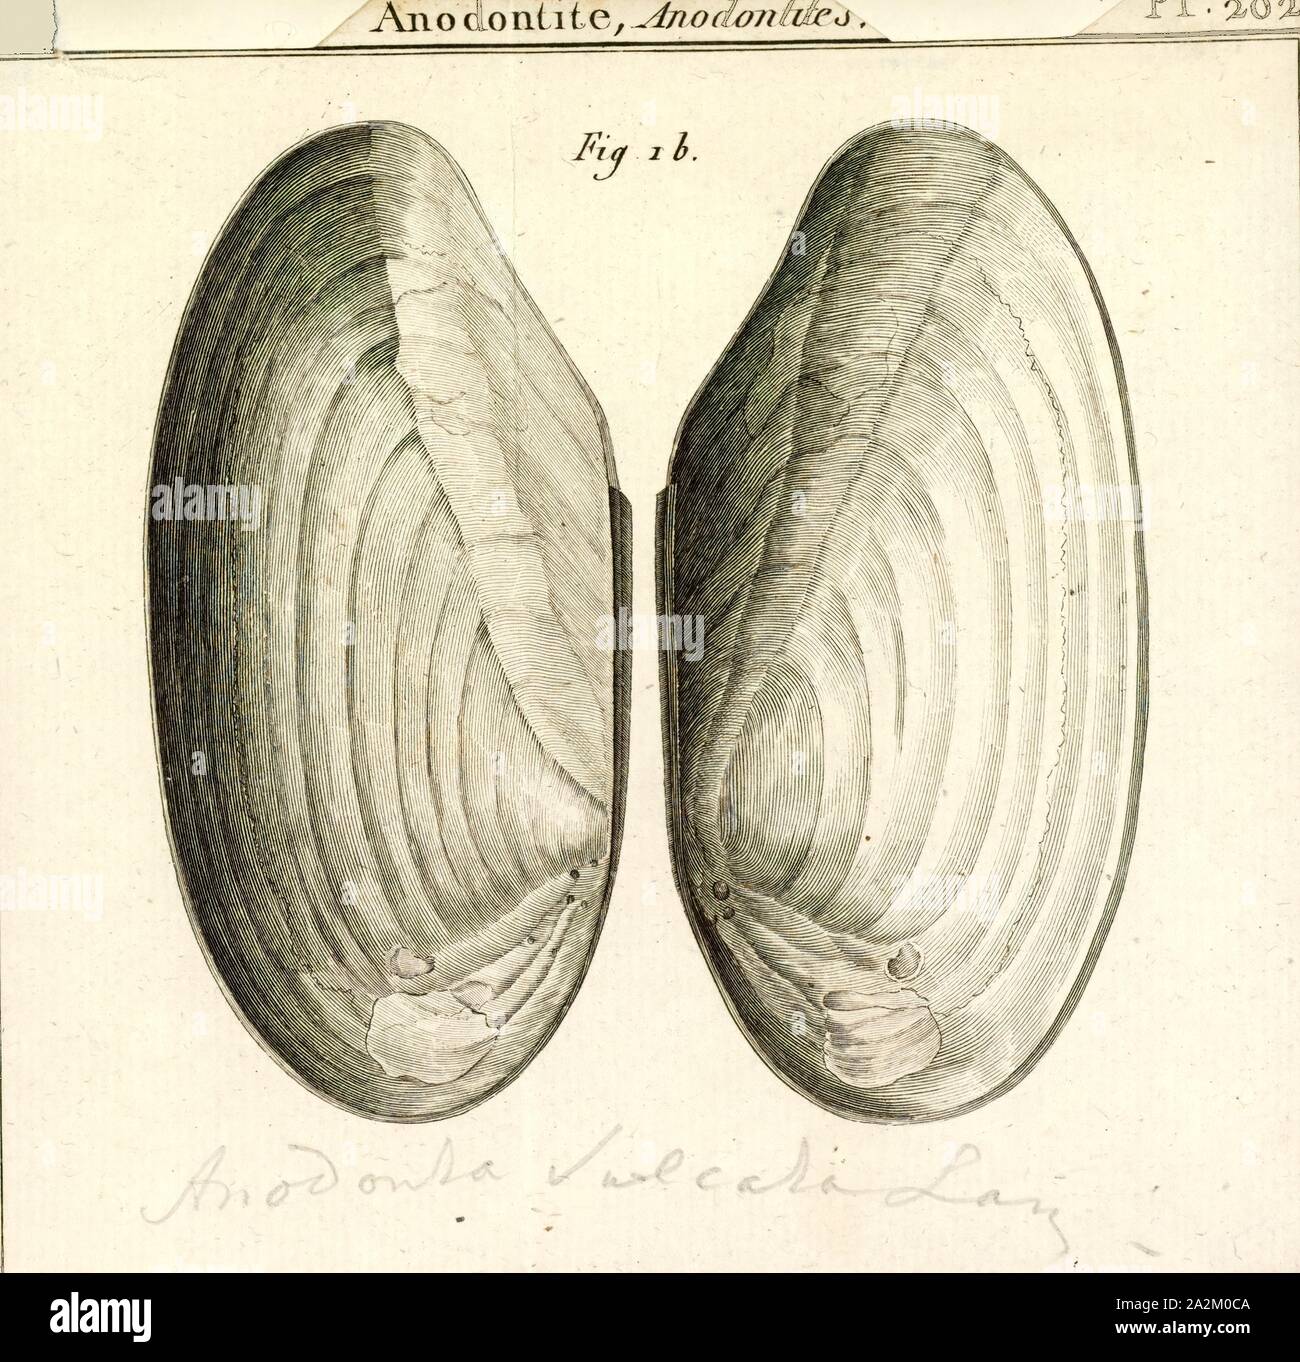 Anodonta sulcata, Print, Anodonta is a genus of freshwater mussels in the family Unionidae, the river mussels Stock Photo